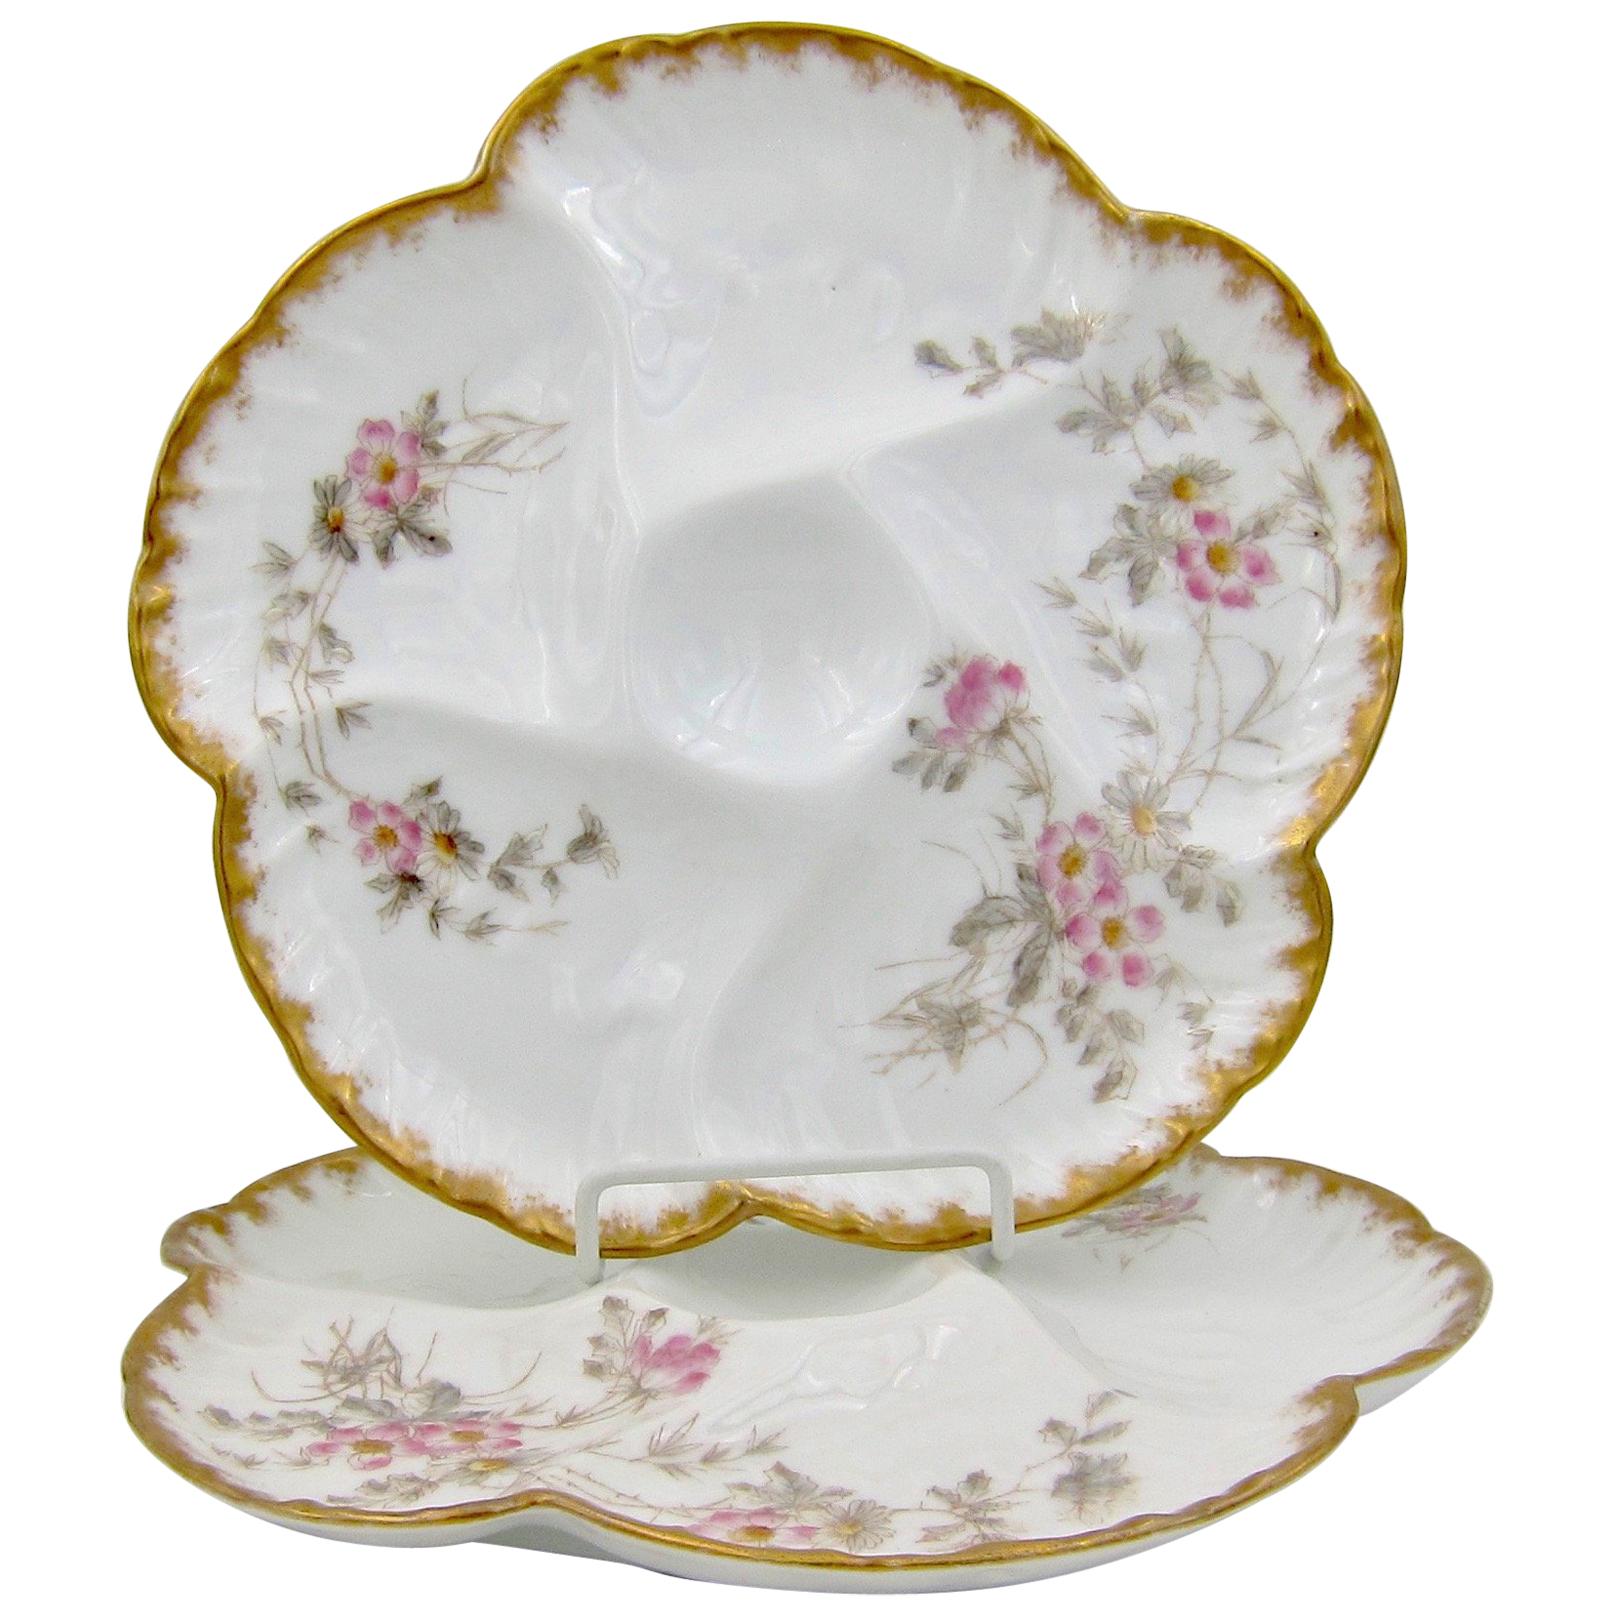 Antique French Limoges Porcelain Oyster Plate Pair, 1880s